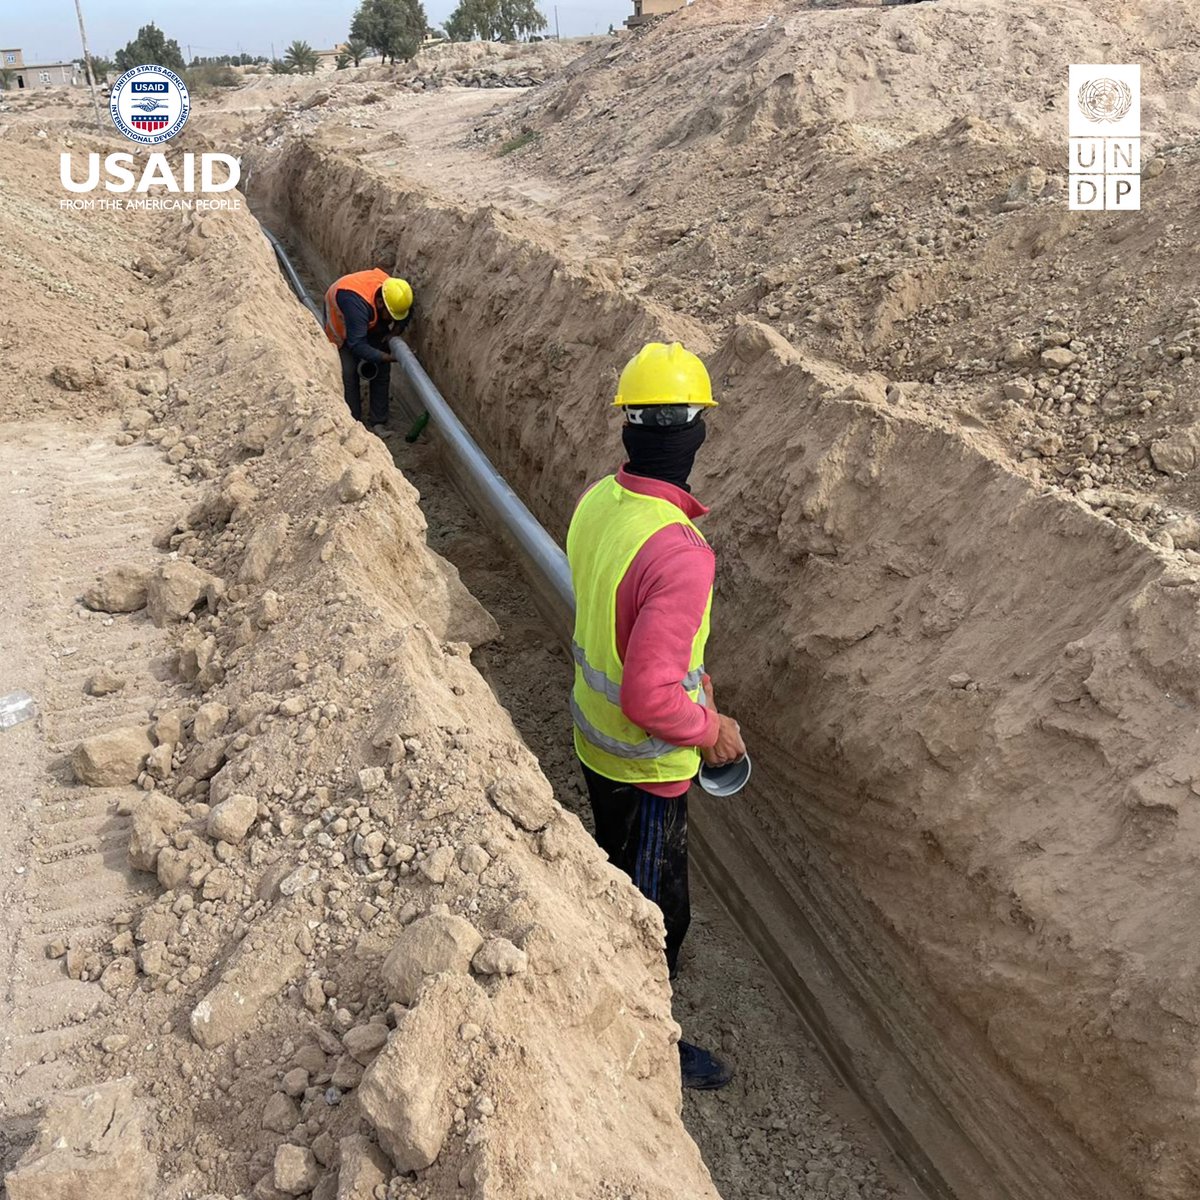 With funding from @USAID, @undpiniraq has completed the Bouhathal and Boudeij Water Network in Amriyat Al-Samoud, #Anbar, #Iraq. This new system will provide clean water to over 1,200 residents, ensuring access even during peak demand in the summer.💧